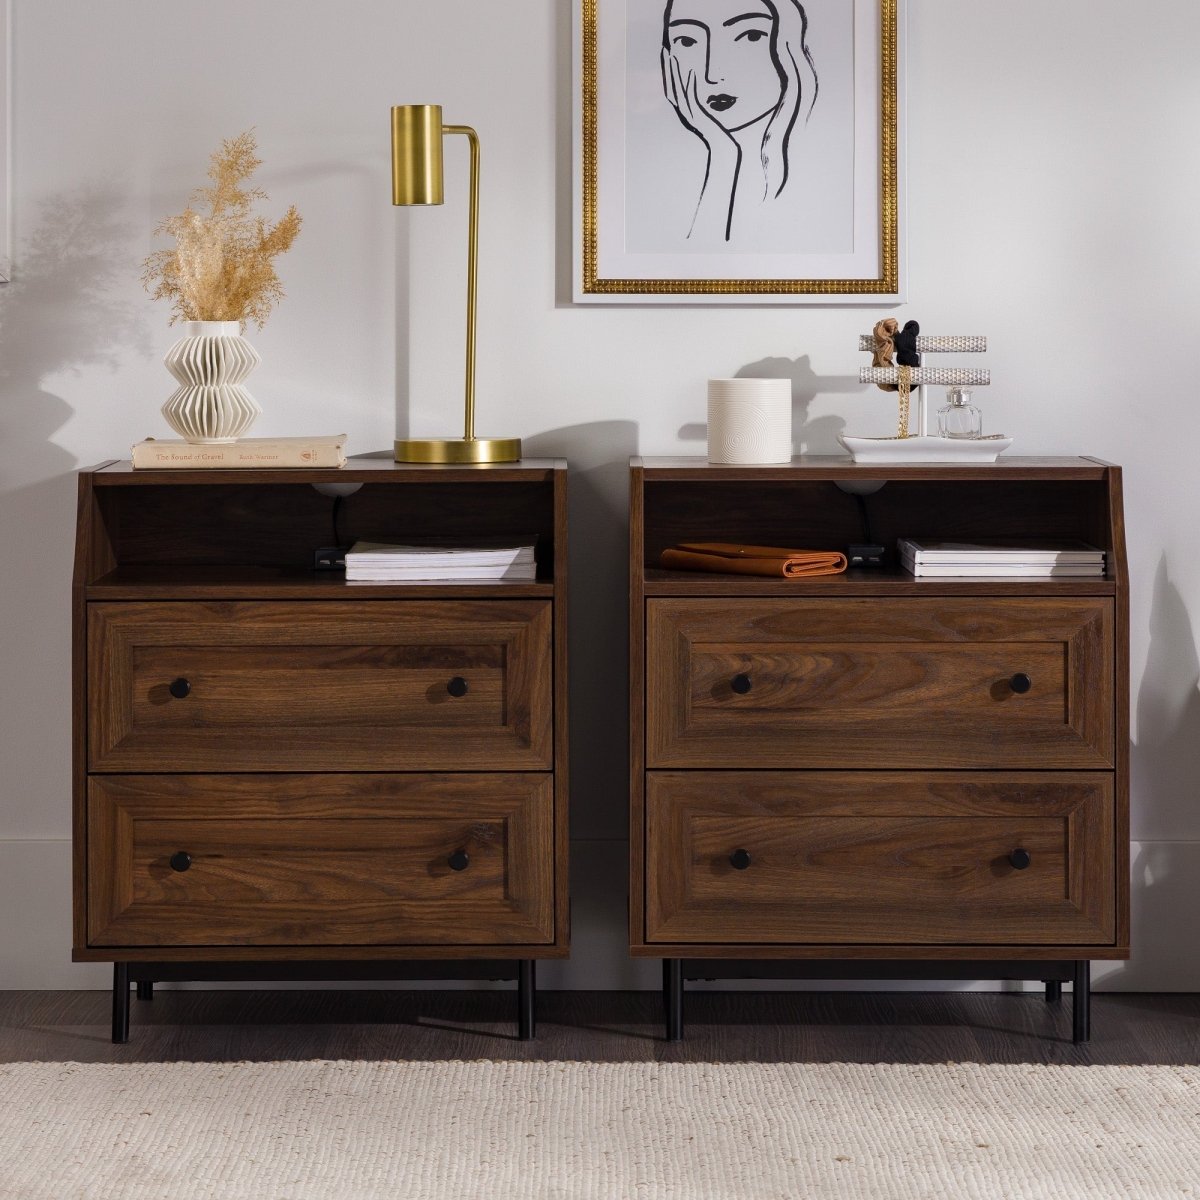 Walker Edison Lisa 2 Drawer Nightstand with USB - lily & onyx